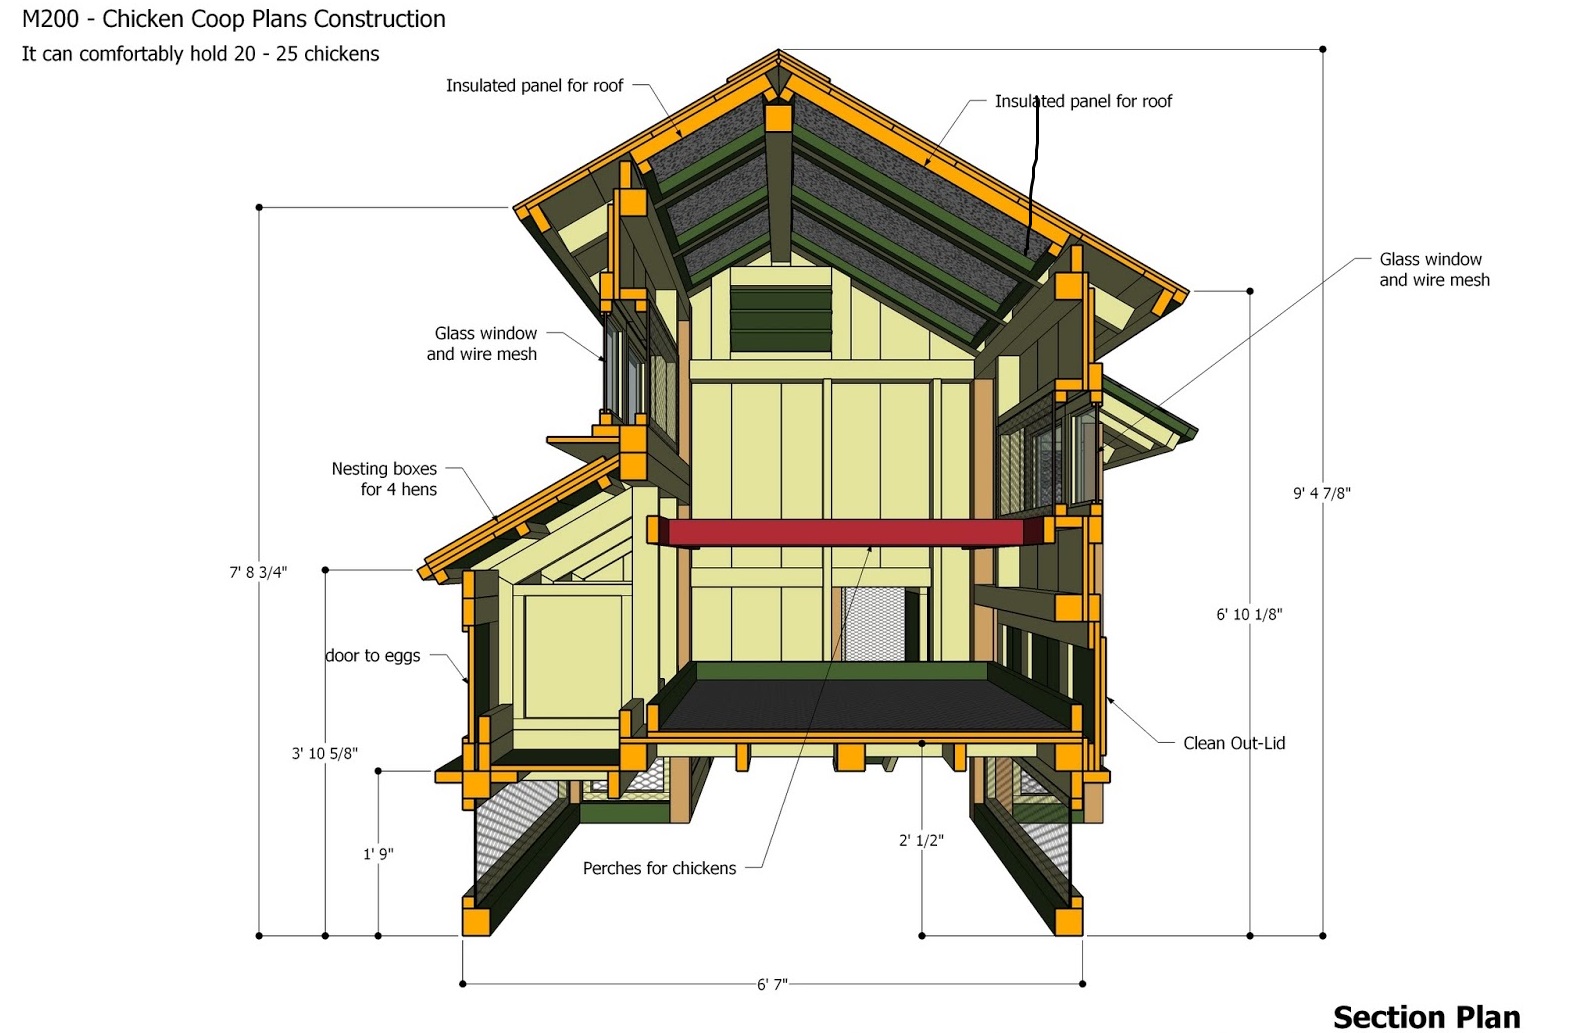 Layouts For Chicken Coops - Chicken Coop Plans Free DownloaD With InsiDe View Of Chicken Coop 10595